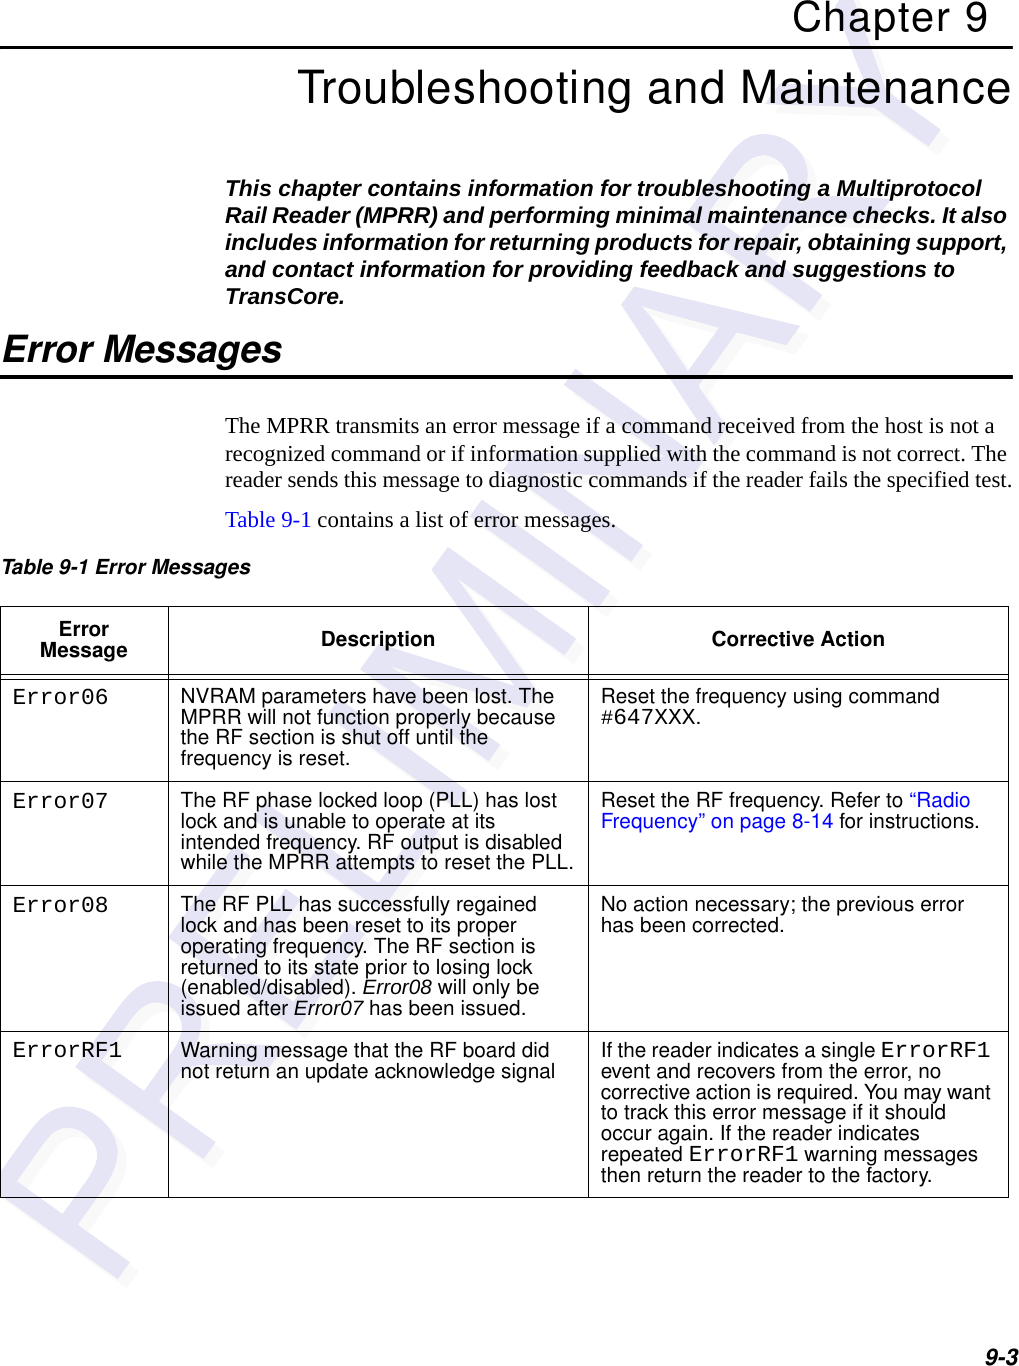 9-3Chapter 9Troubleshooting and MaintenanceThis chapter contains information for troubleshooting a Multiprotocol Rail Reader (MPRR) and performing minimal maintenance checks. It also includes information for returning products for repair, obtaining support, and contact information for providing feedback and suggestions to TransCore. Error MessagesThe MPRR transmits an error message if a command received from the host is not a recognized command or if information supplied with the command is not correct. The reader sends this message to diagnostic commands if the reader fails the specified test.Table 9-1 contains a list of error messages. Table 9-1 Error Messages Error Message Description Corrective ActionError06 NVRAM parameters have been lost. The MPRR will not function properly because the RF section is shut off until the frequency is reset.Reset the frequency using command #647XXX.Error07 The RF phase locked loop (PLL) has lost lock and is unable to operate at its intended frequency. RF output is disabled while the MPRR attempts to reset the PLL.Reset the RF frequency. Refer to “Radio Frequency” on page 8-14 for instructions. Error08 The RF PLL has successfully regained lock and has been reset to its proper operating frequency. The RF section is returned to its state prior to losing lock (enabled/disabled). Error08 will only be issued after Error07 has been issued.No action necessary; the previous error has been corrected.ErrorRF1 Warning message that the RF board did not return an update acknowledge signal If the reader indicates a single ErrorRF1 event and recovers from the error, no corrective action is required. You may want to track this error message if it should occur again. If the reader indicates repeated ErrorRF1 warning messages then return the reader to the factory.